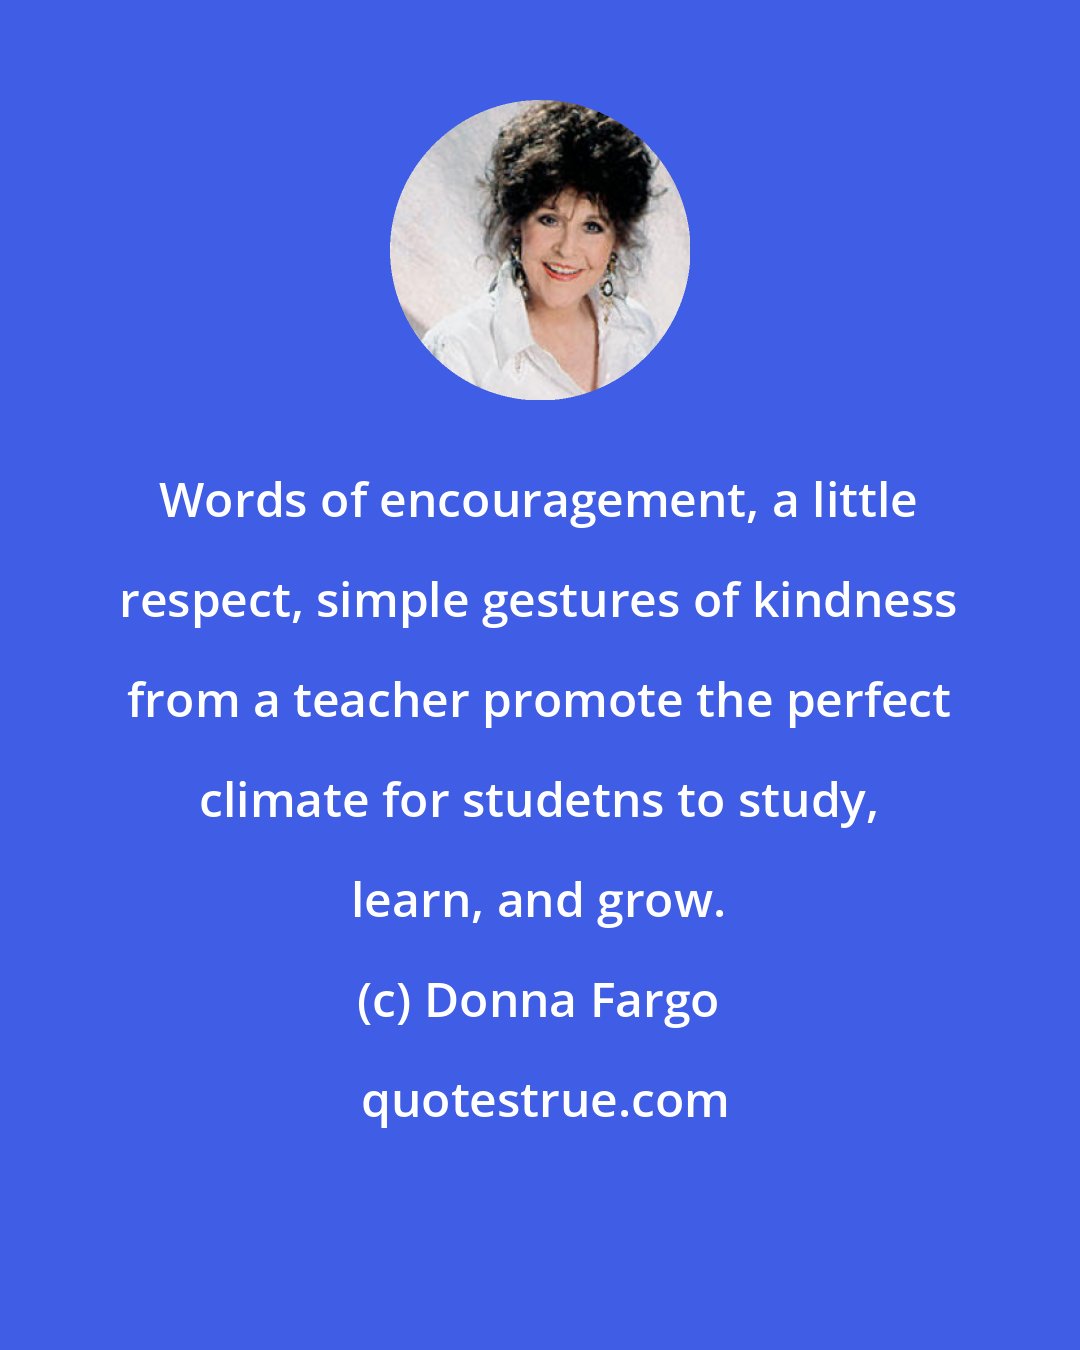 Donna Fargo: Words of encouragement, a little respect, simple gestures of kindness from a teacher promote the perfect climate for studetns to study, learn, and grow.